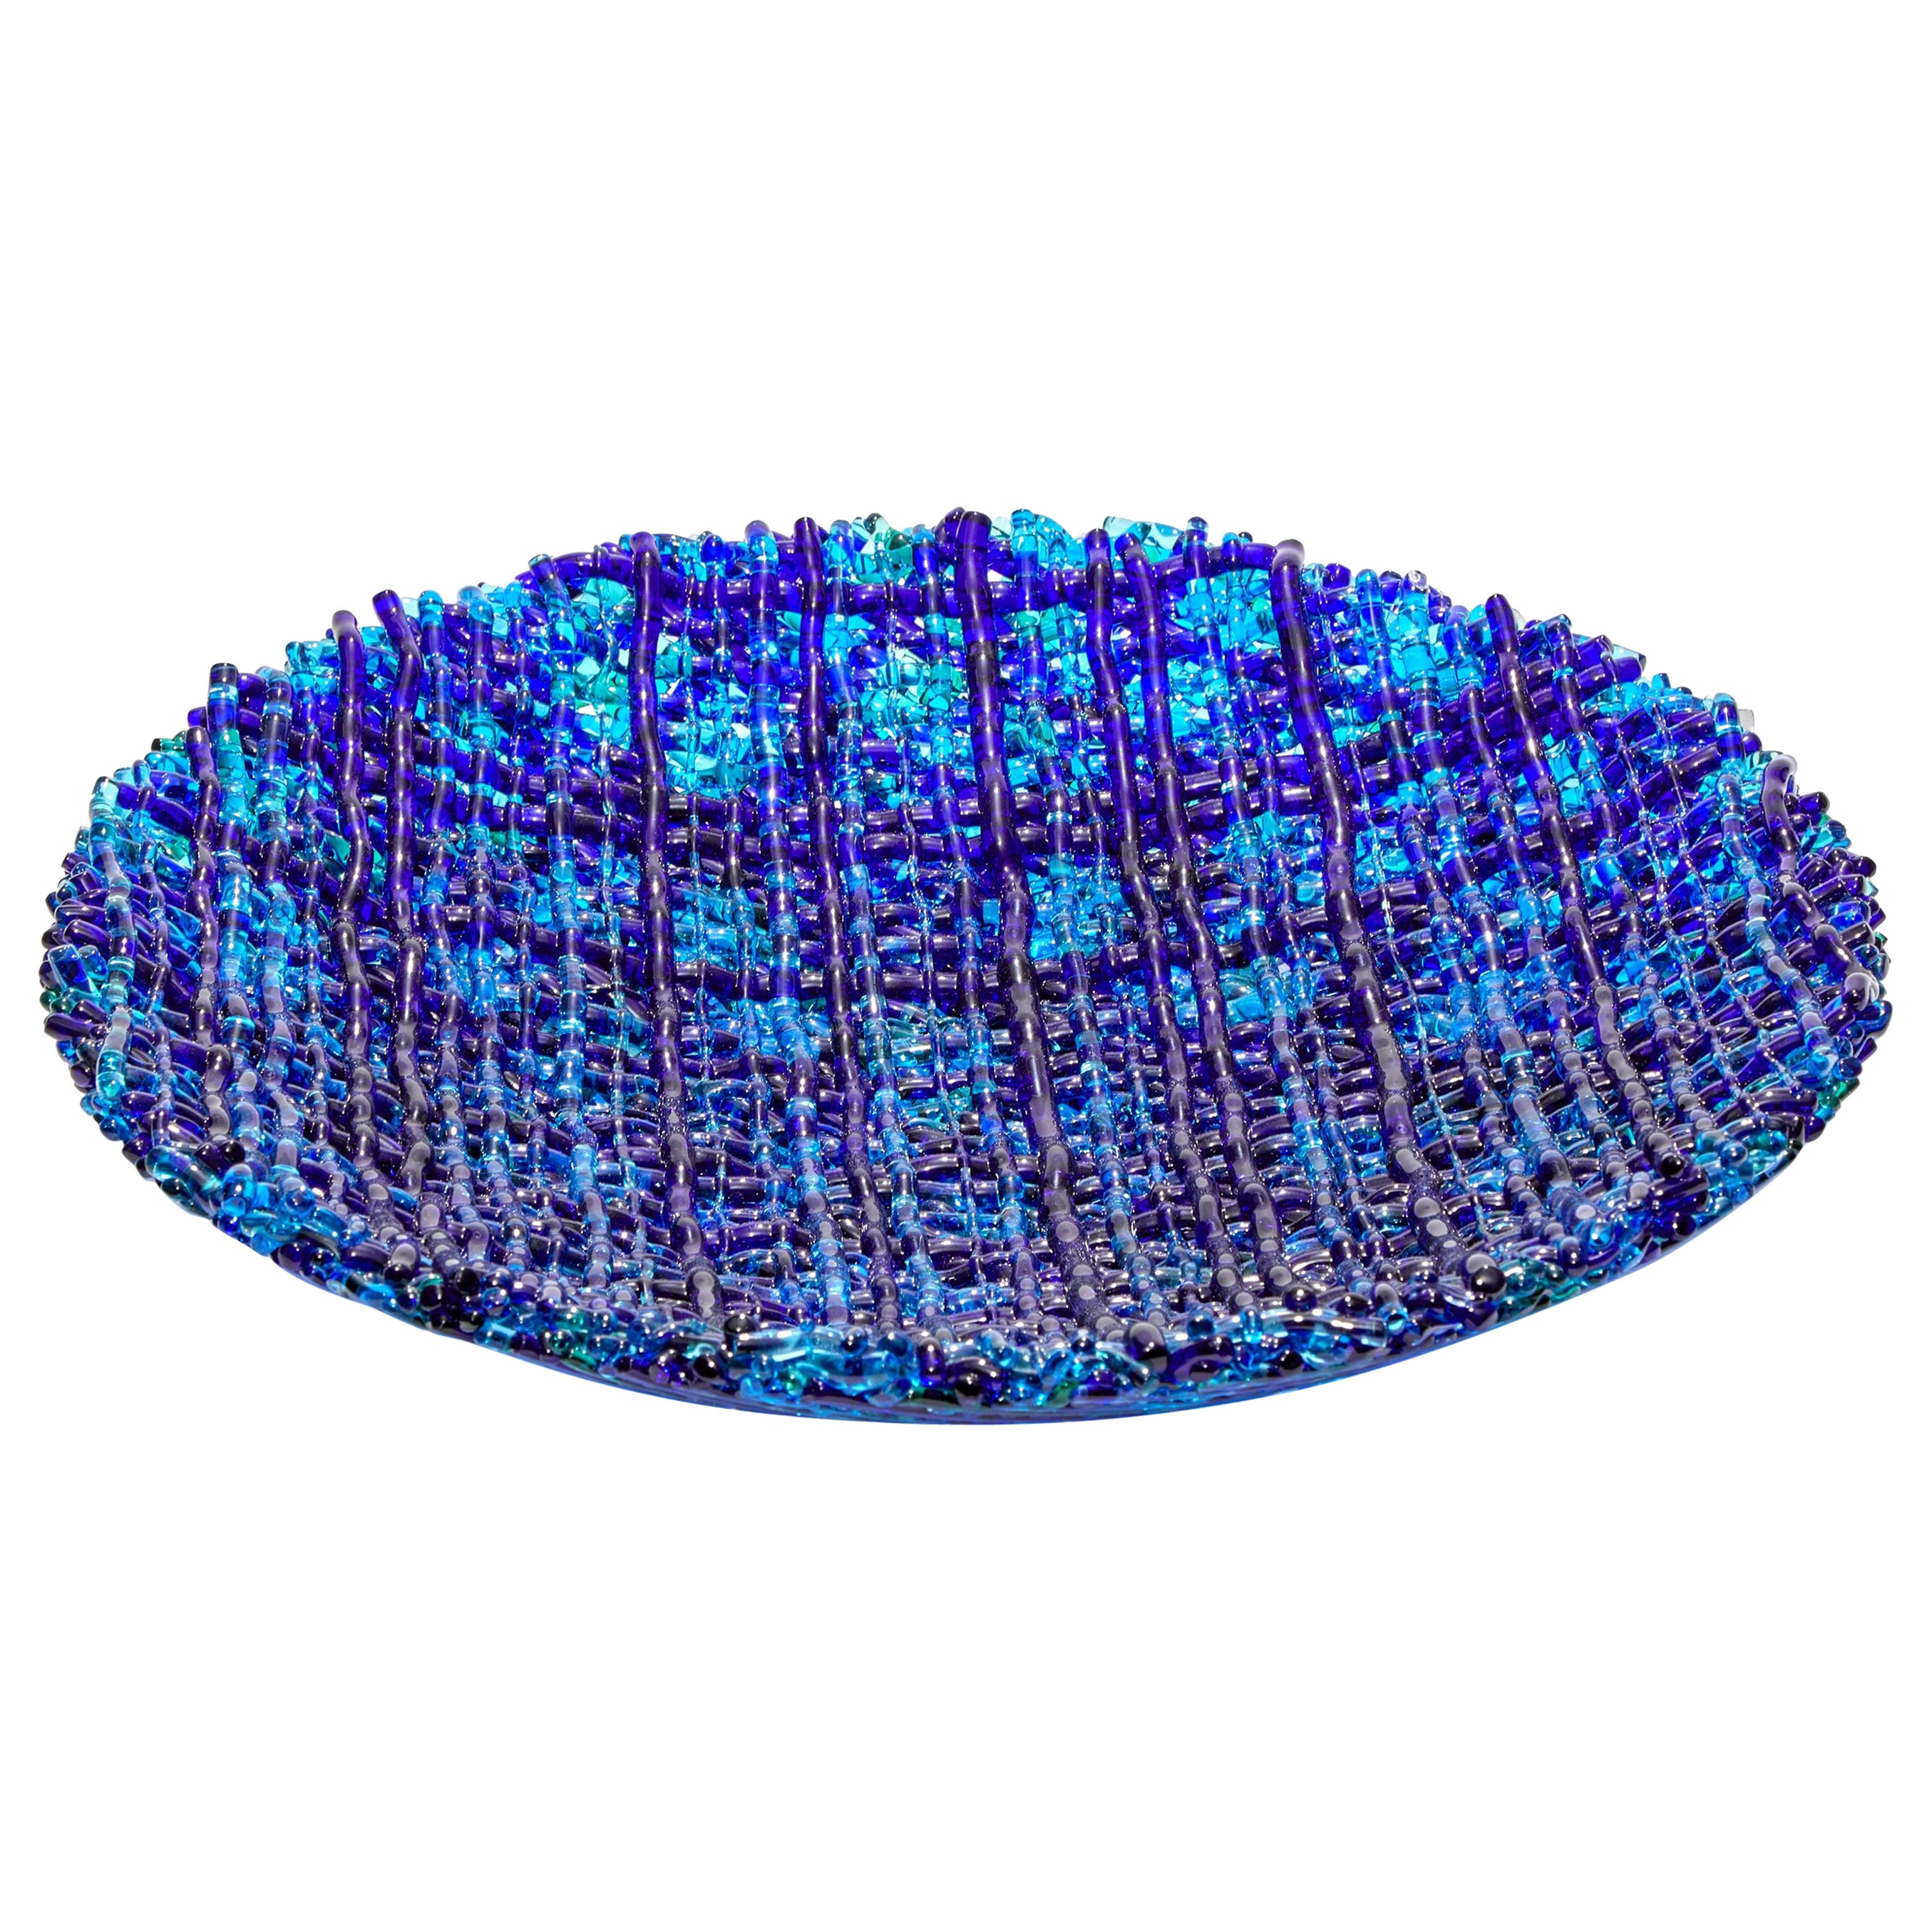 Blue Topography, a Woven Glass Sculptural Centrepiece by Cathryn Shilling